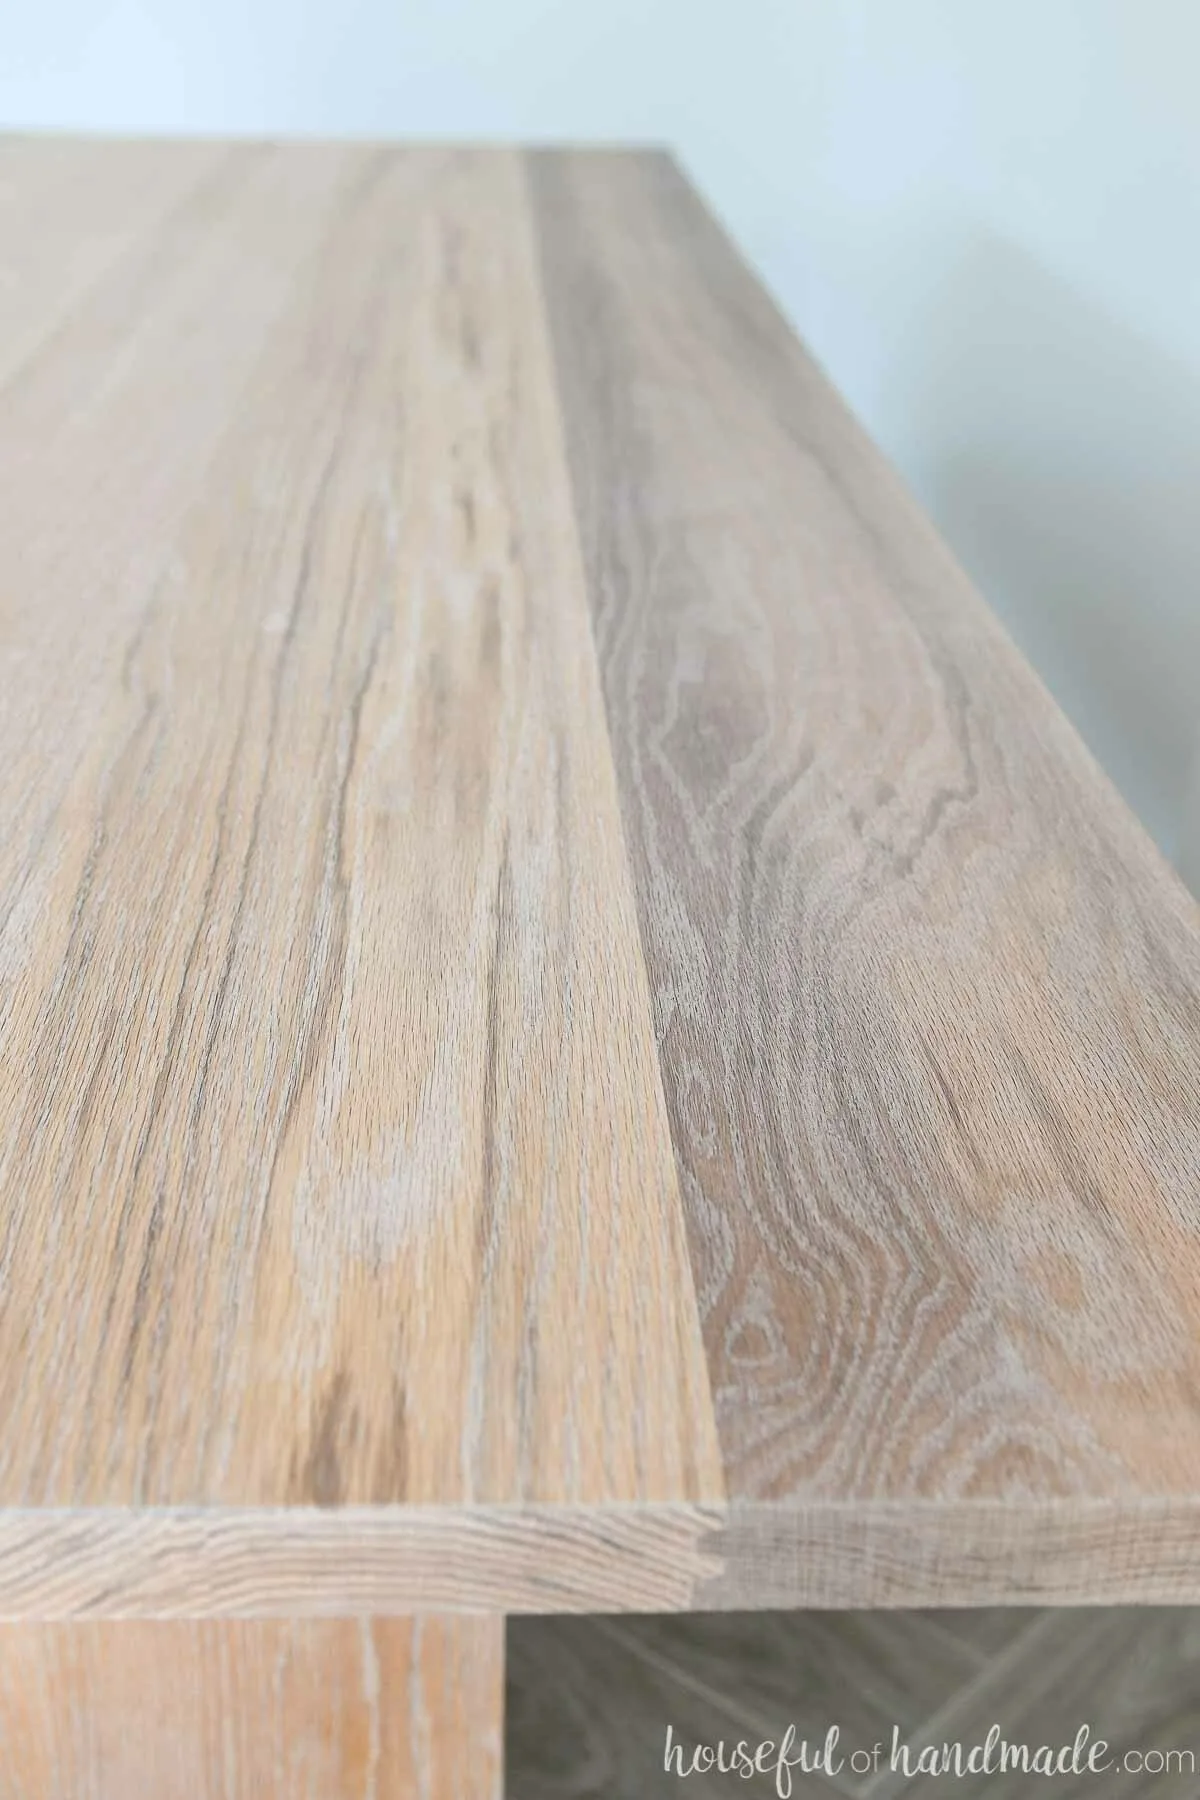 Close up of the oak grain with the Pickled White TrueTone color from Waterlox applied to it. 